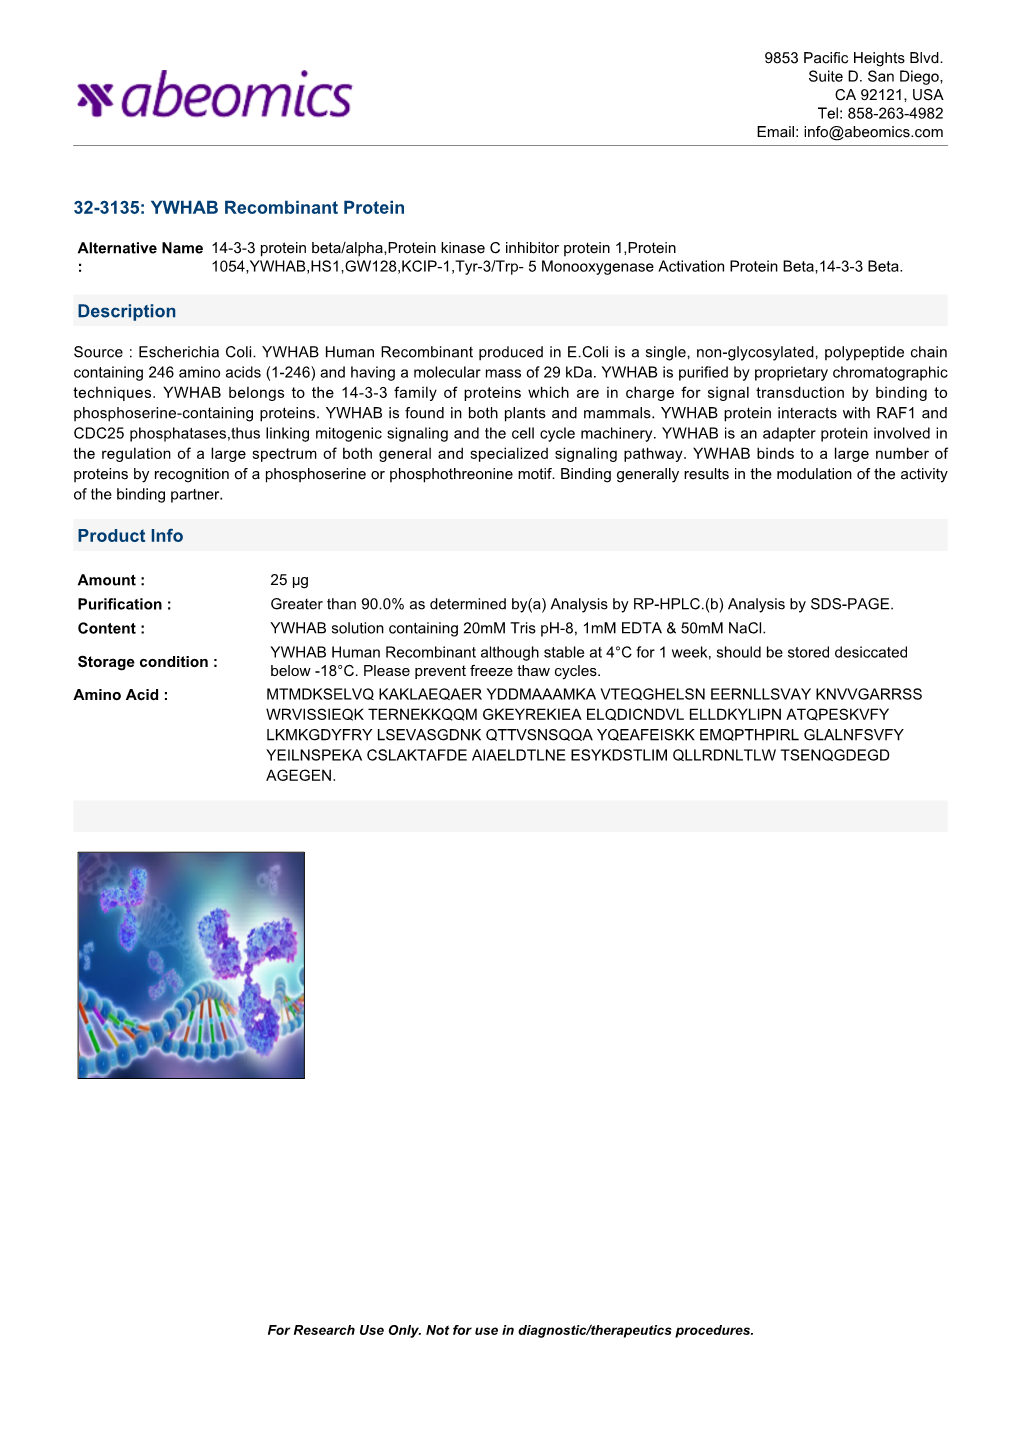 YWHAB Recombinant Protein Description Product Info